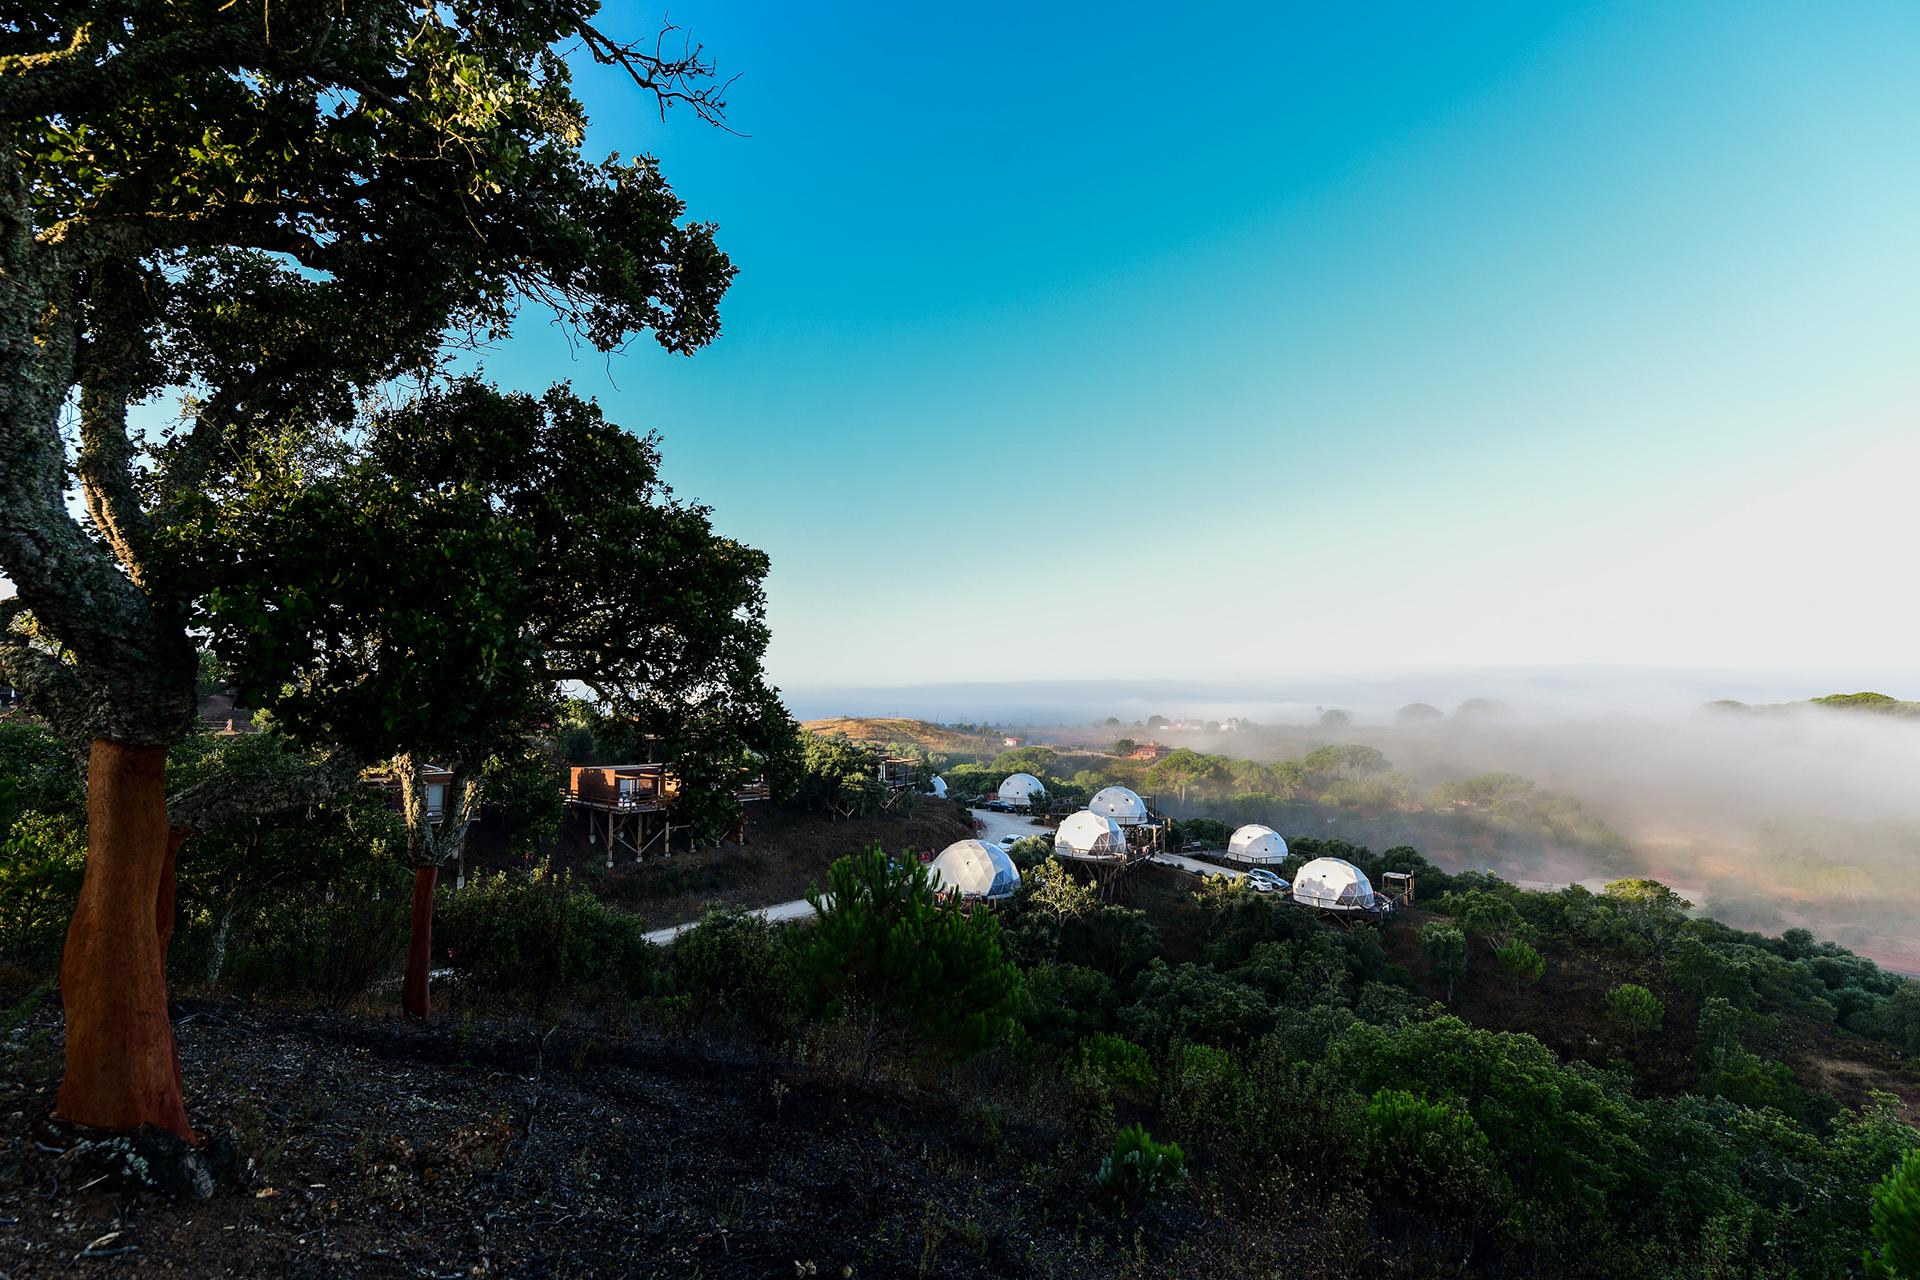 white geodesic domes on the mountainside